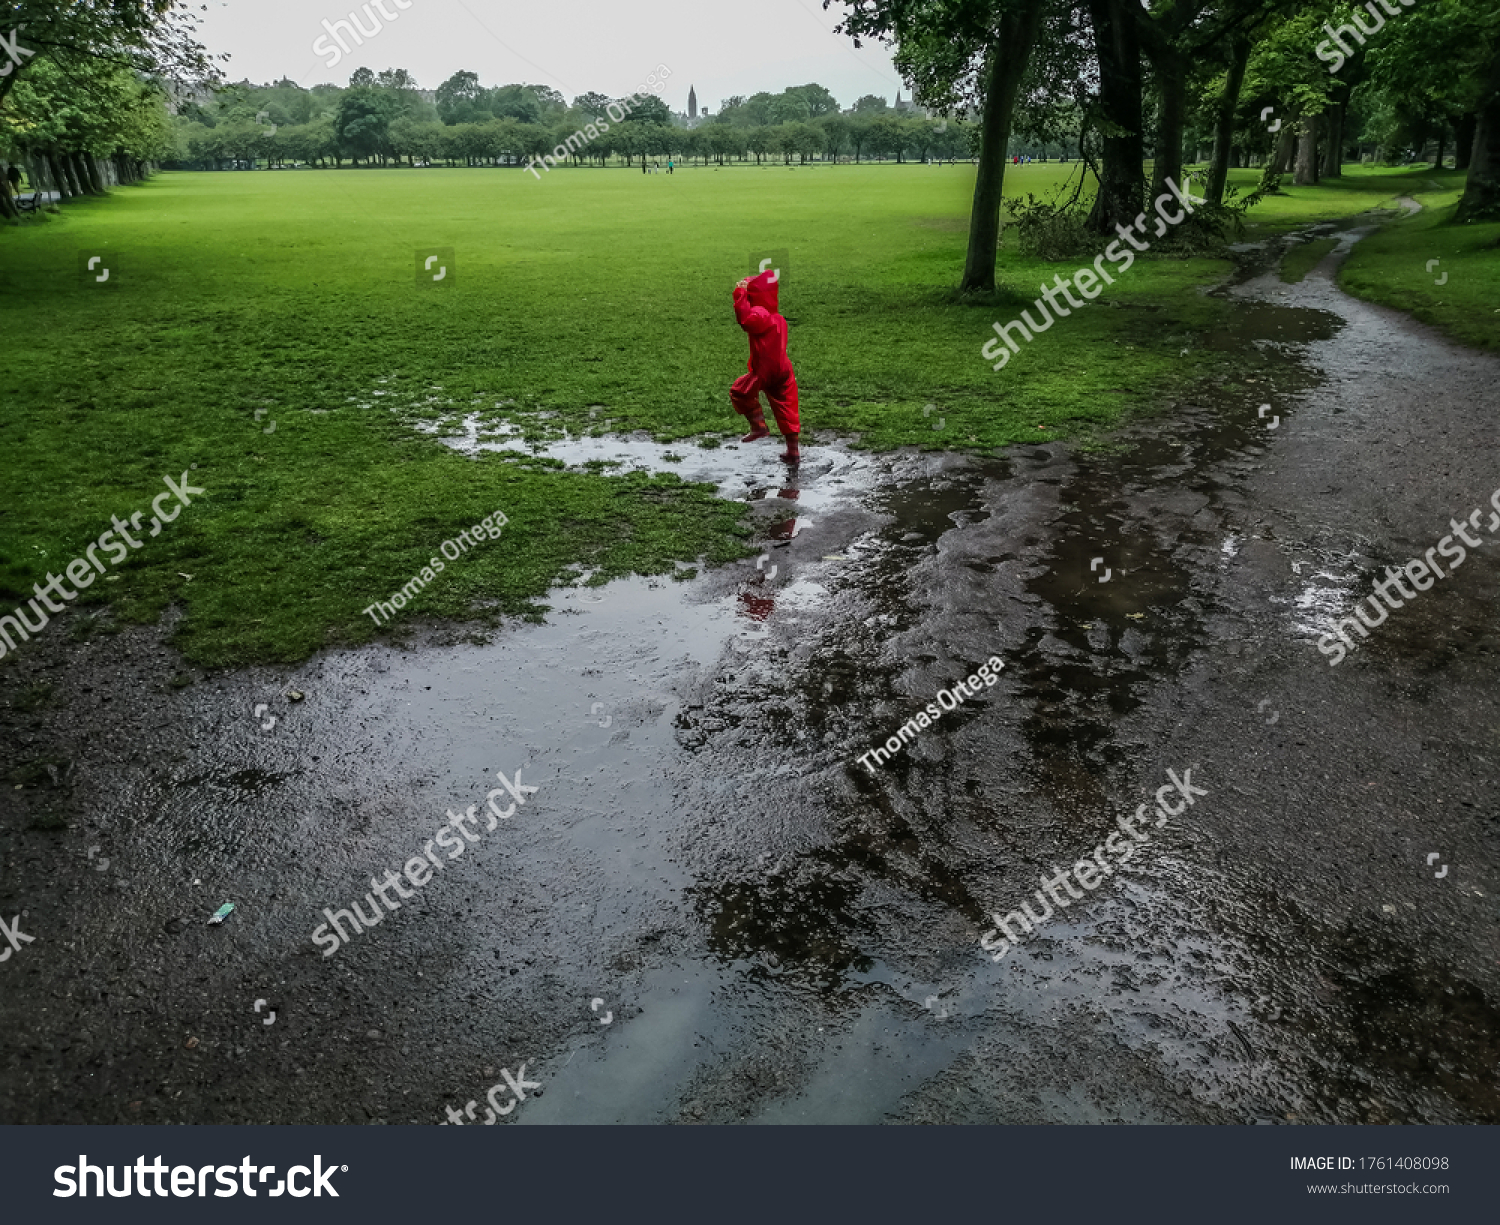 Child Playing Mud Puddle Stock Photo (Edit Now) 1761408098